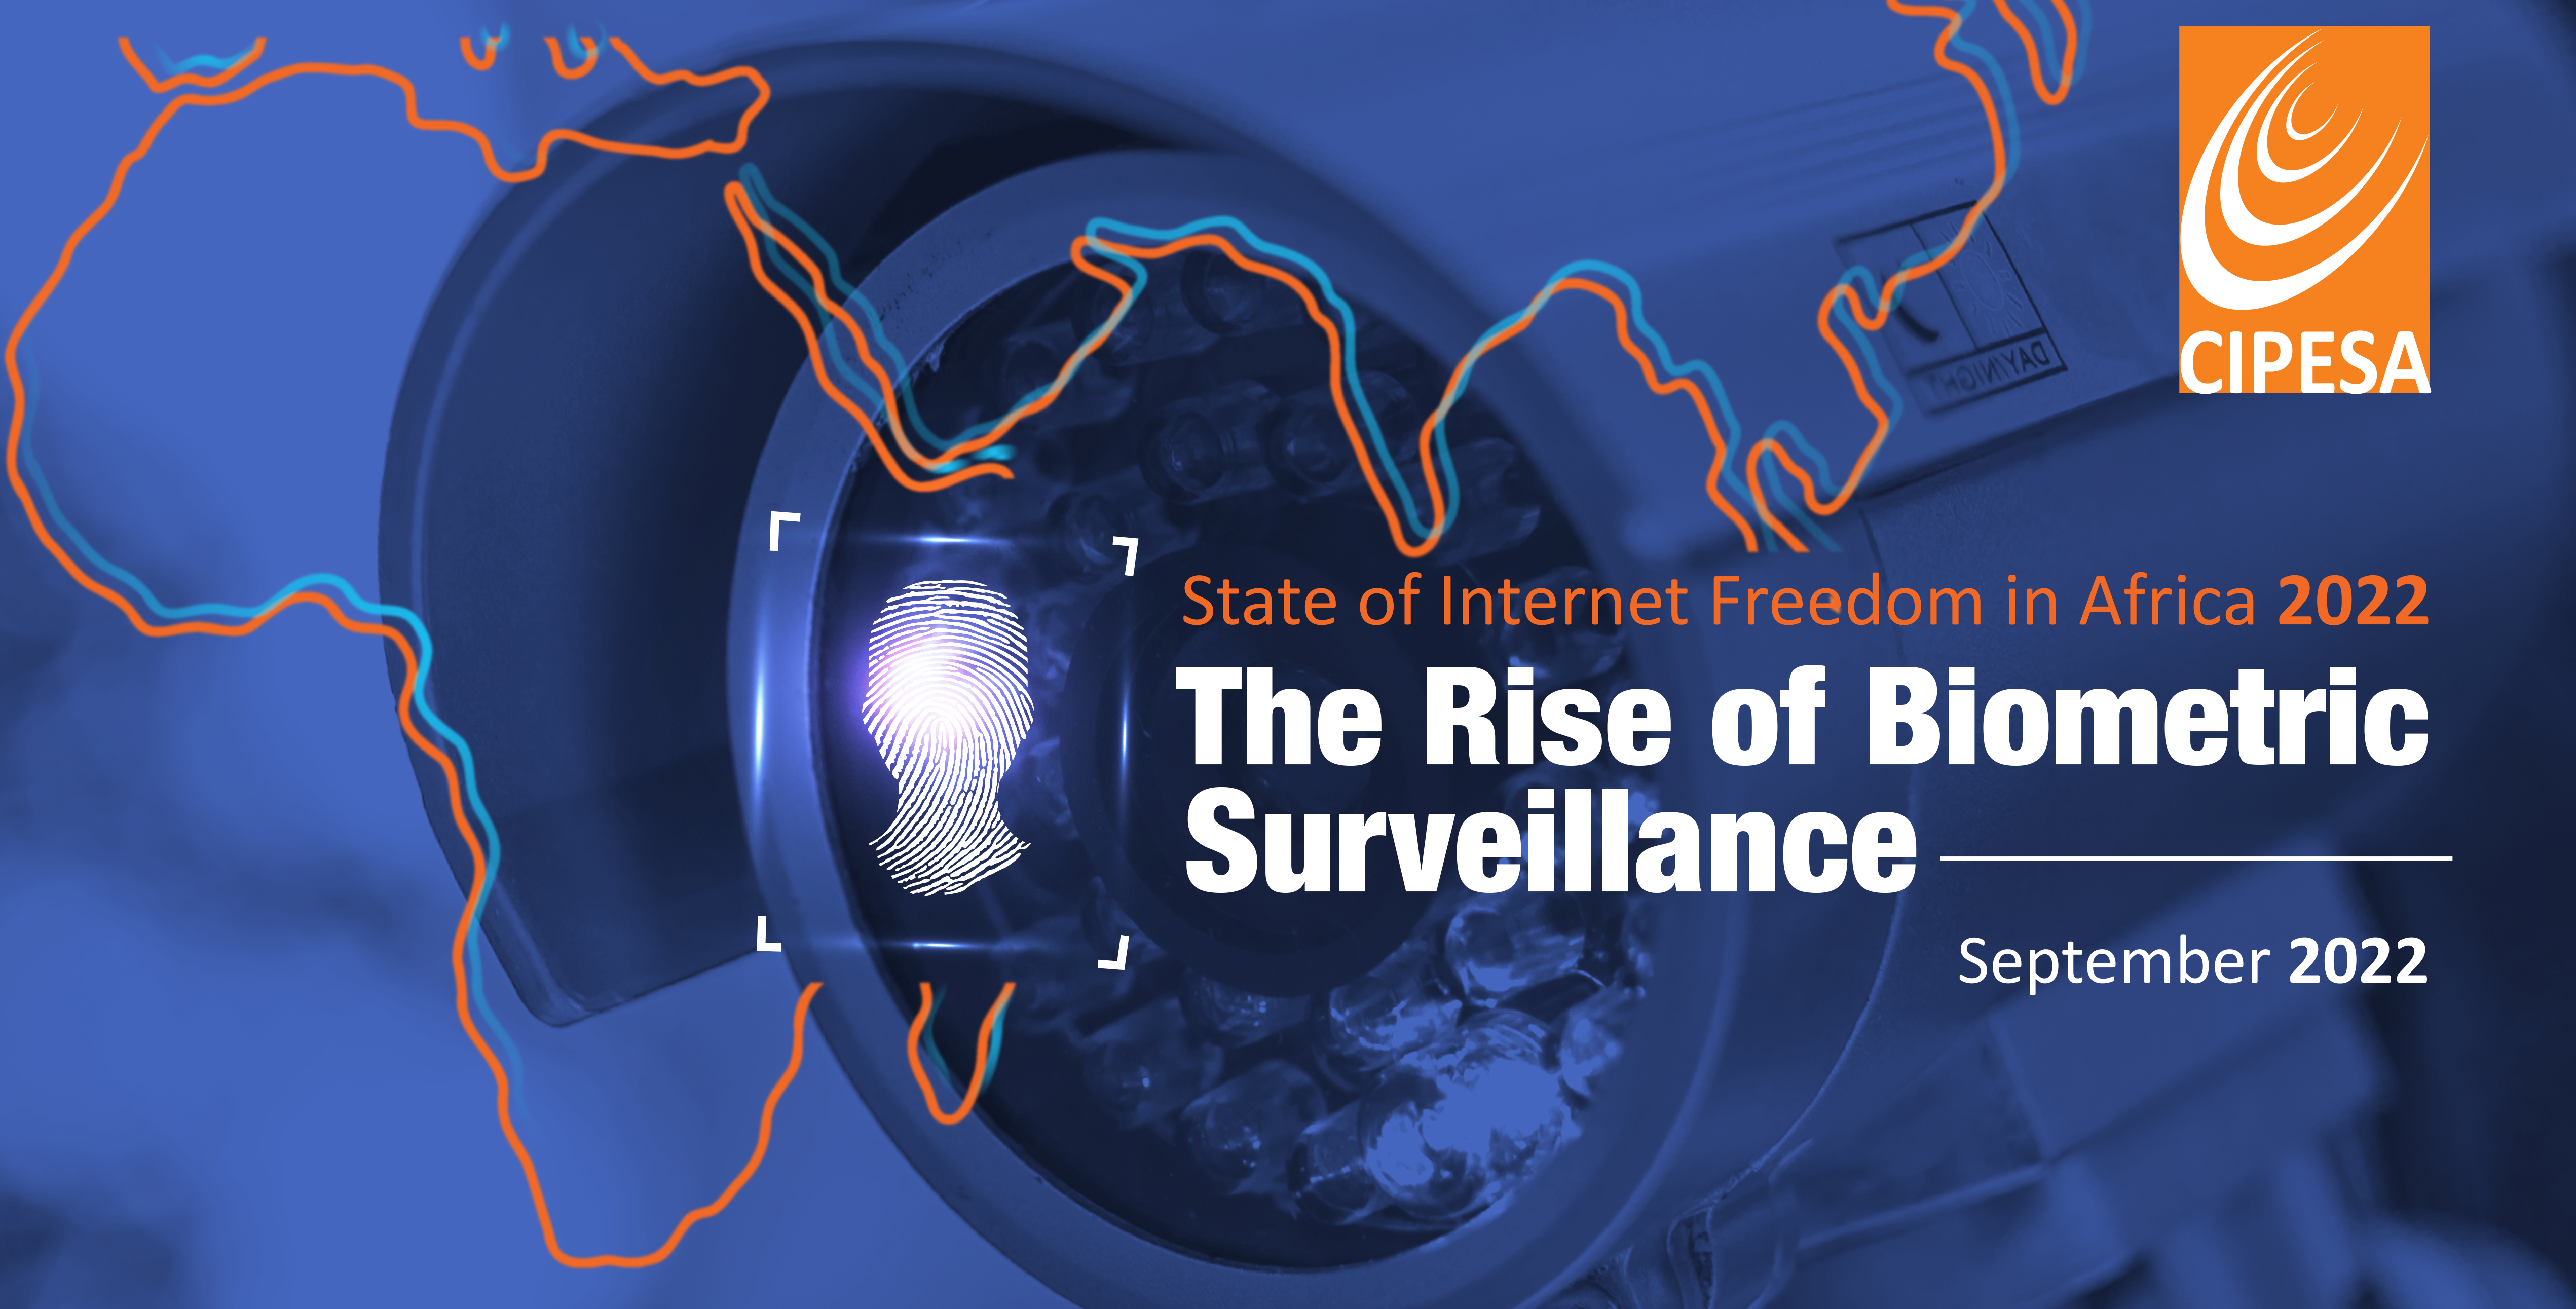 State of Internet Freedom in Africa 2022: The Rise of Biometric Surveillance